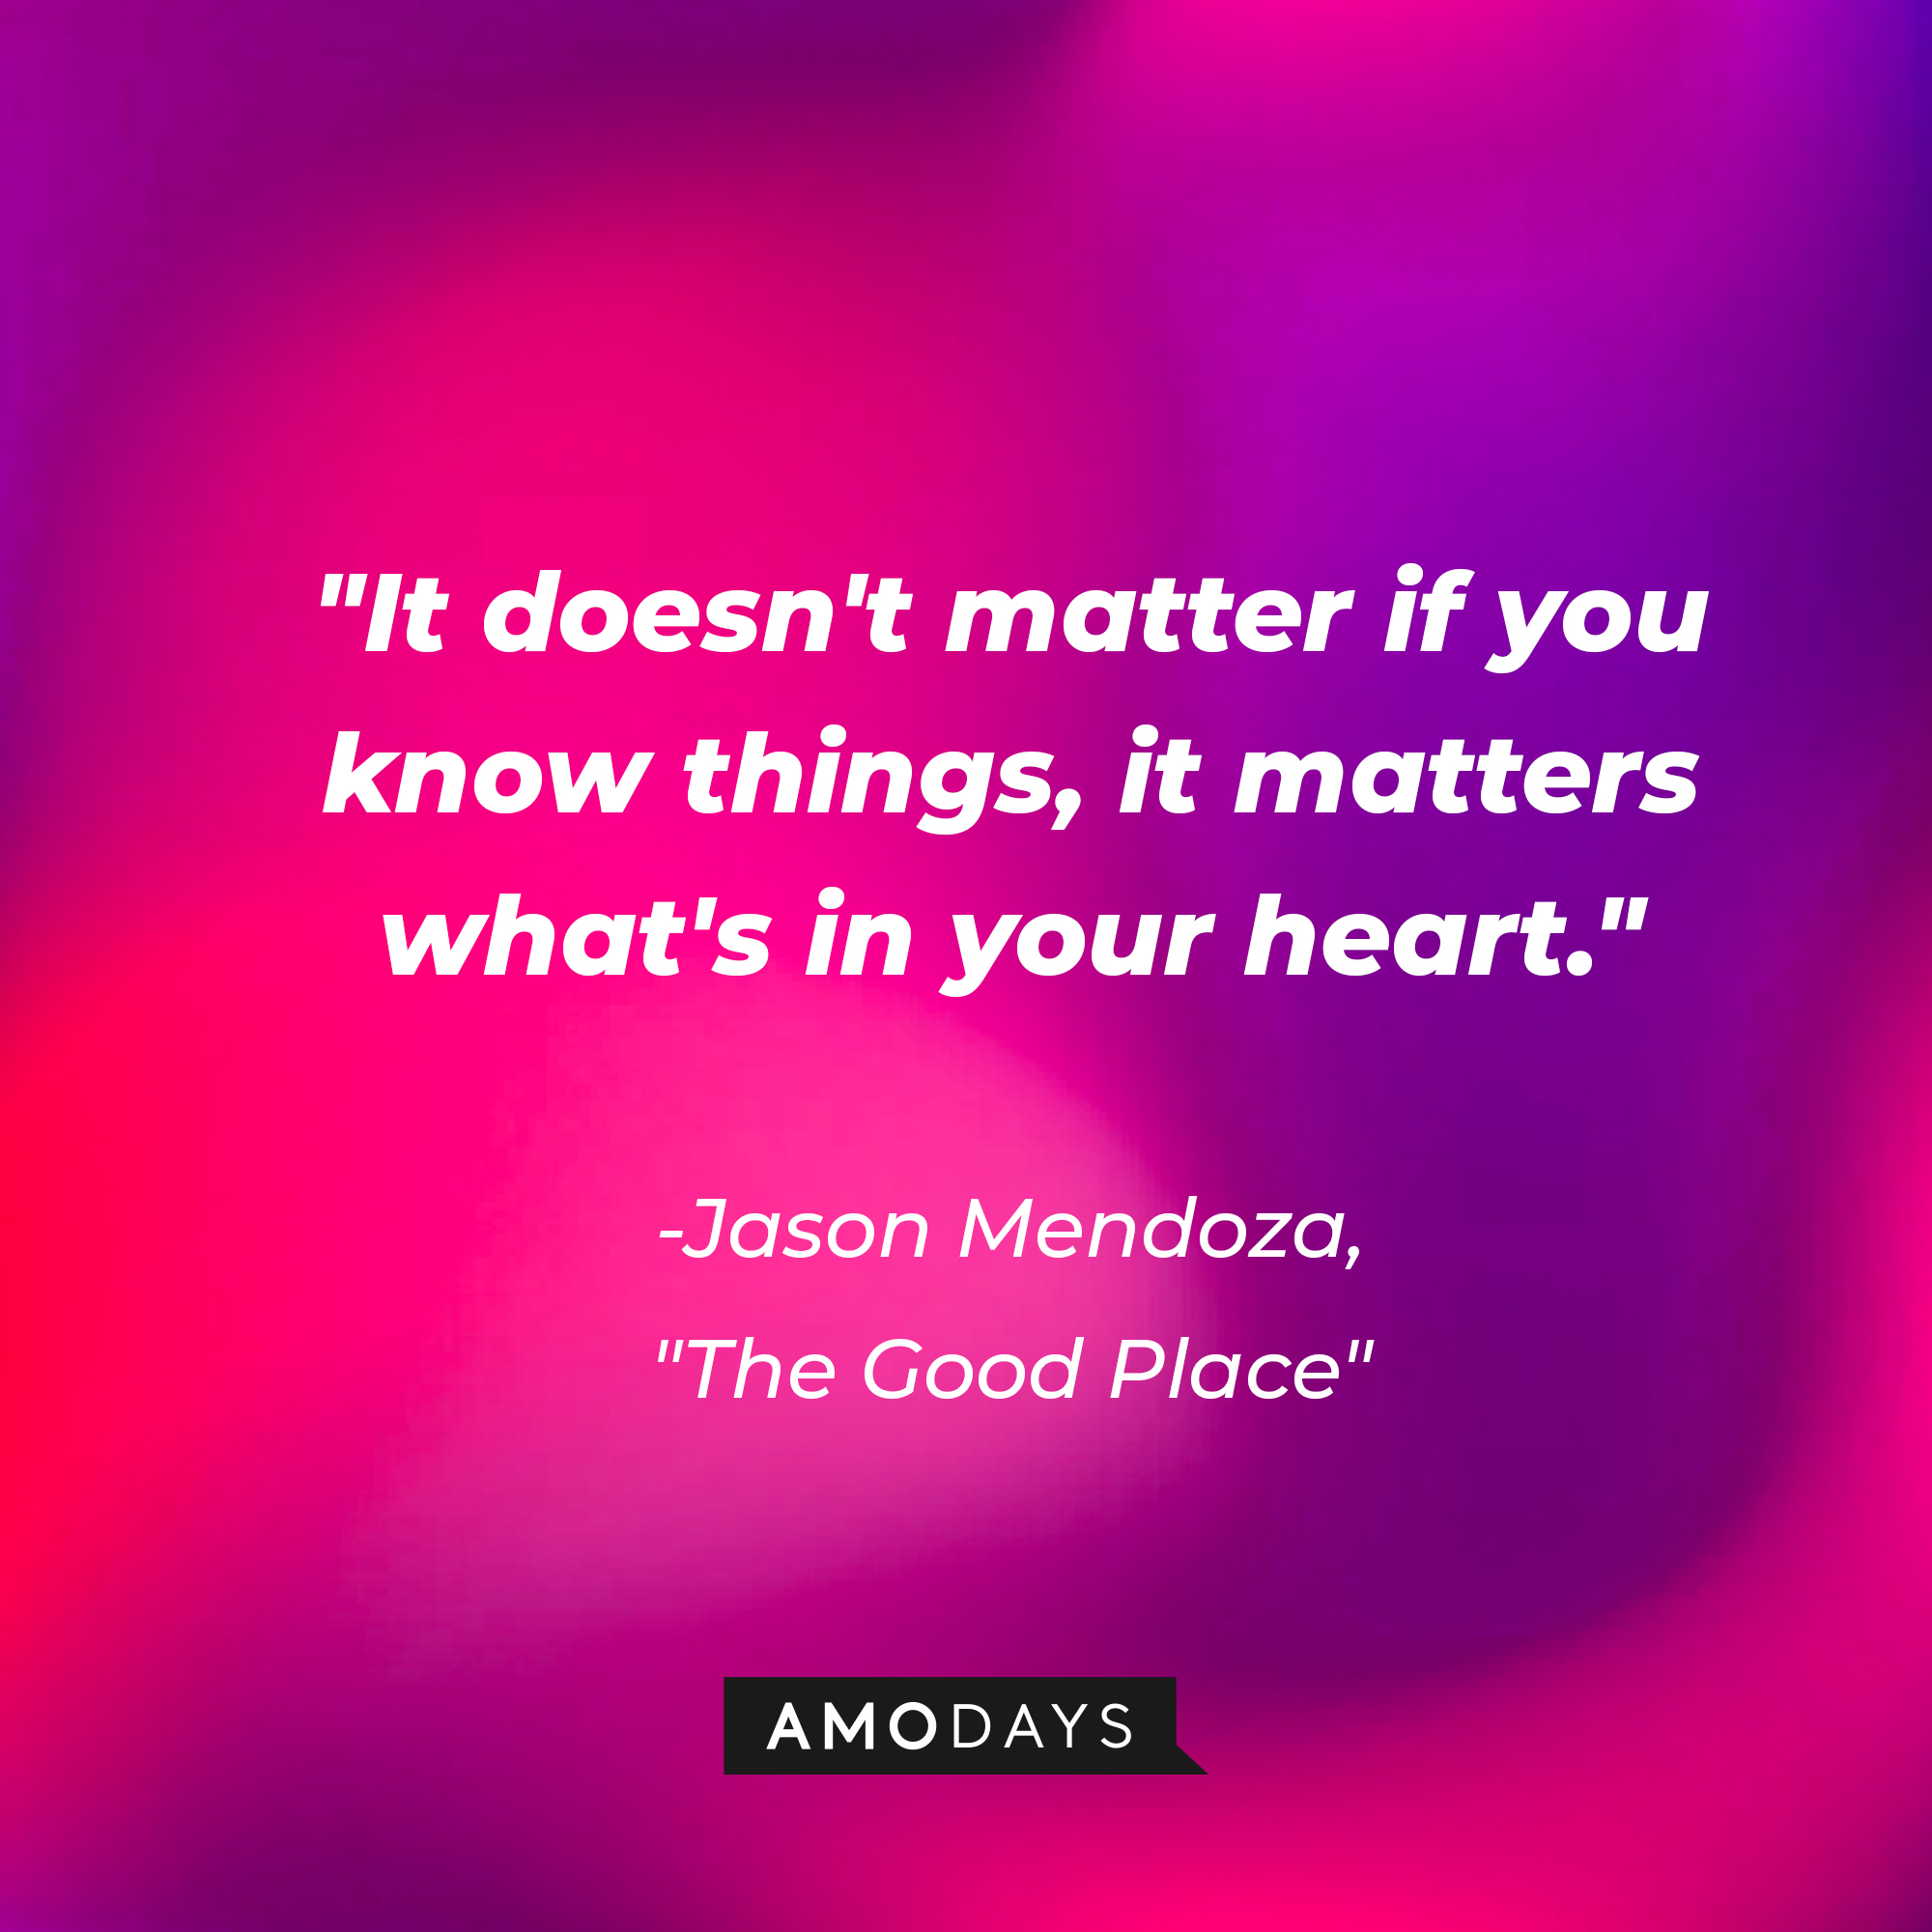 Jason Mendoza's quote in "The Good Place:" “It doesn't matter if you know things, it matters what's in your heart.” | Source: Amodays